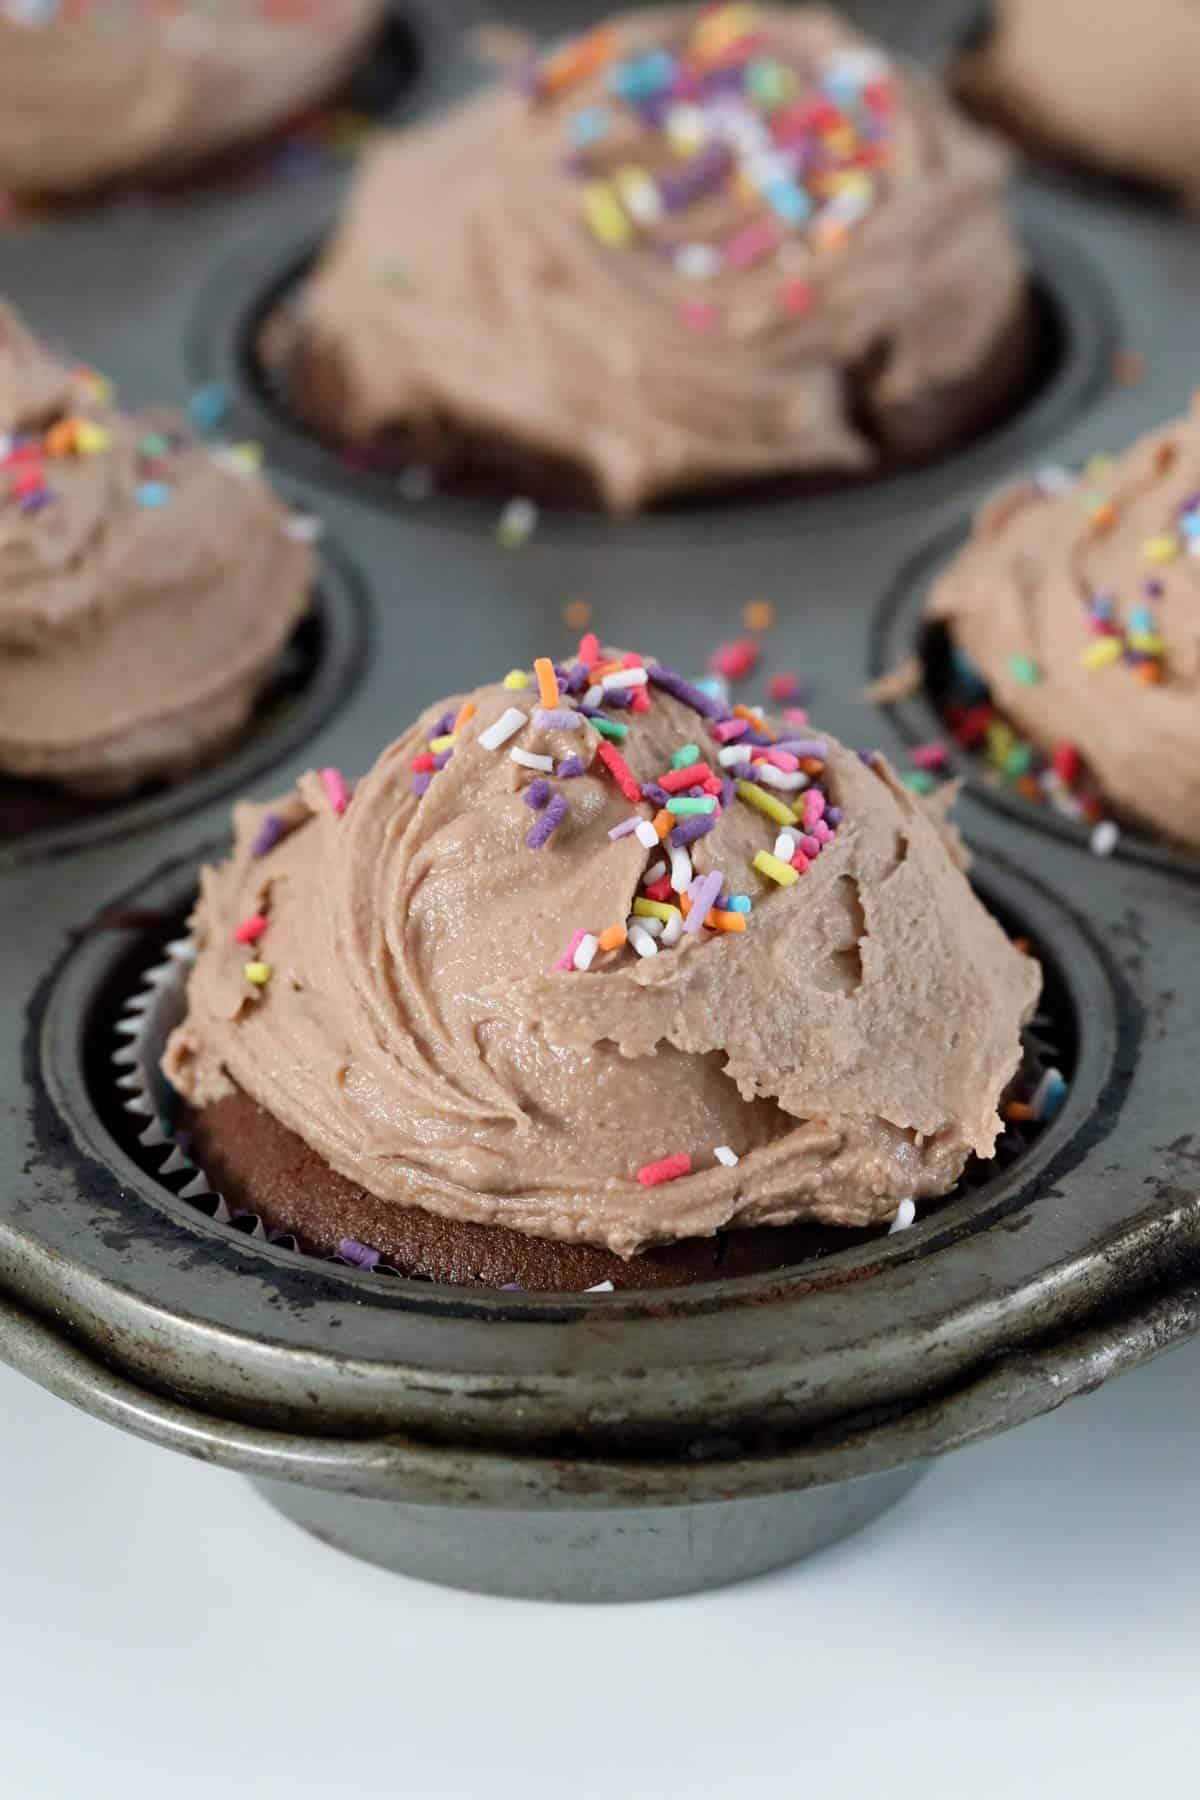 A chocolate frosted cupcake.